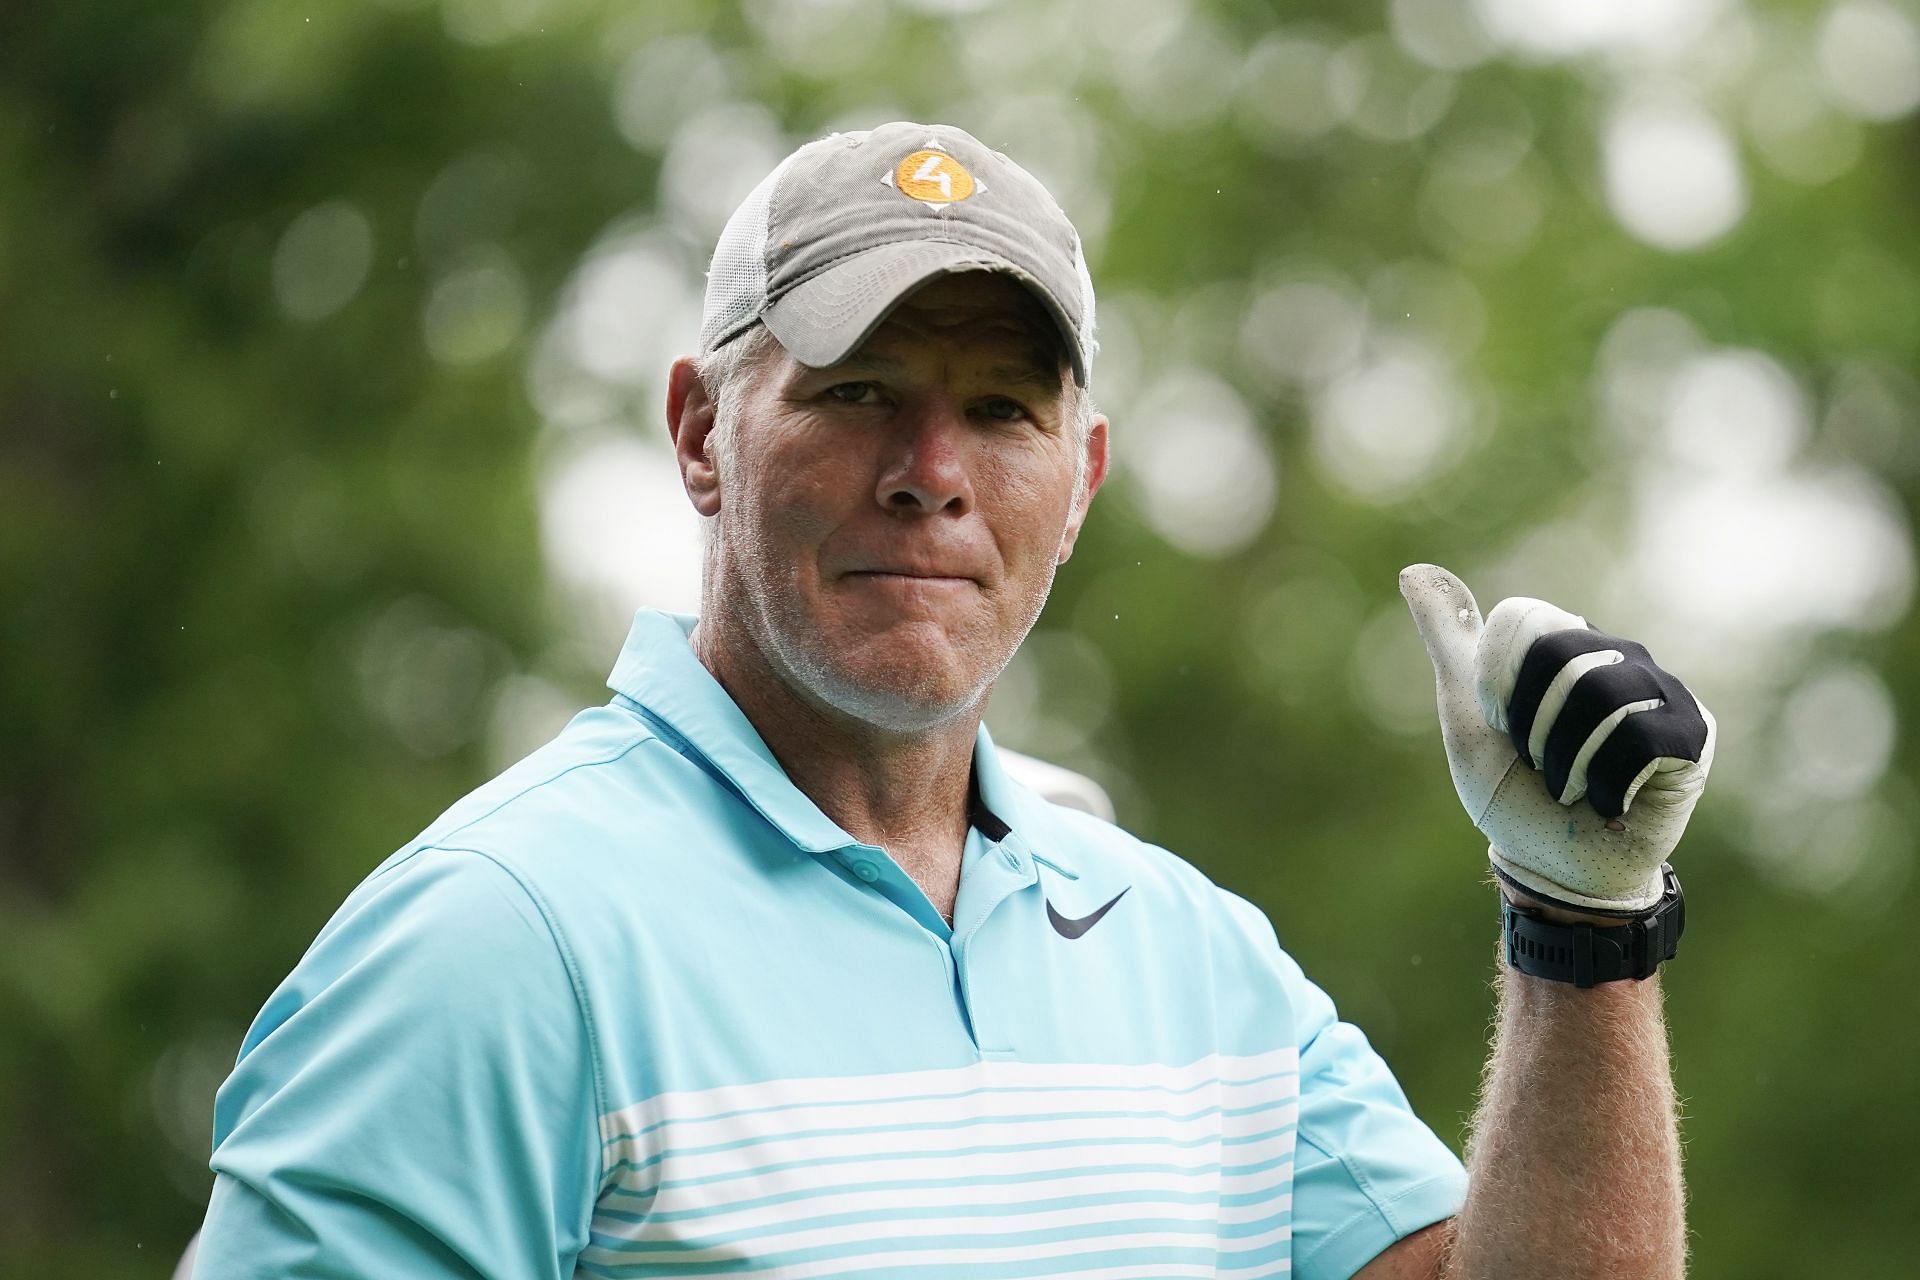 There was a major development in the Brett Favre fraud scandal in Mississippi.